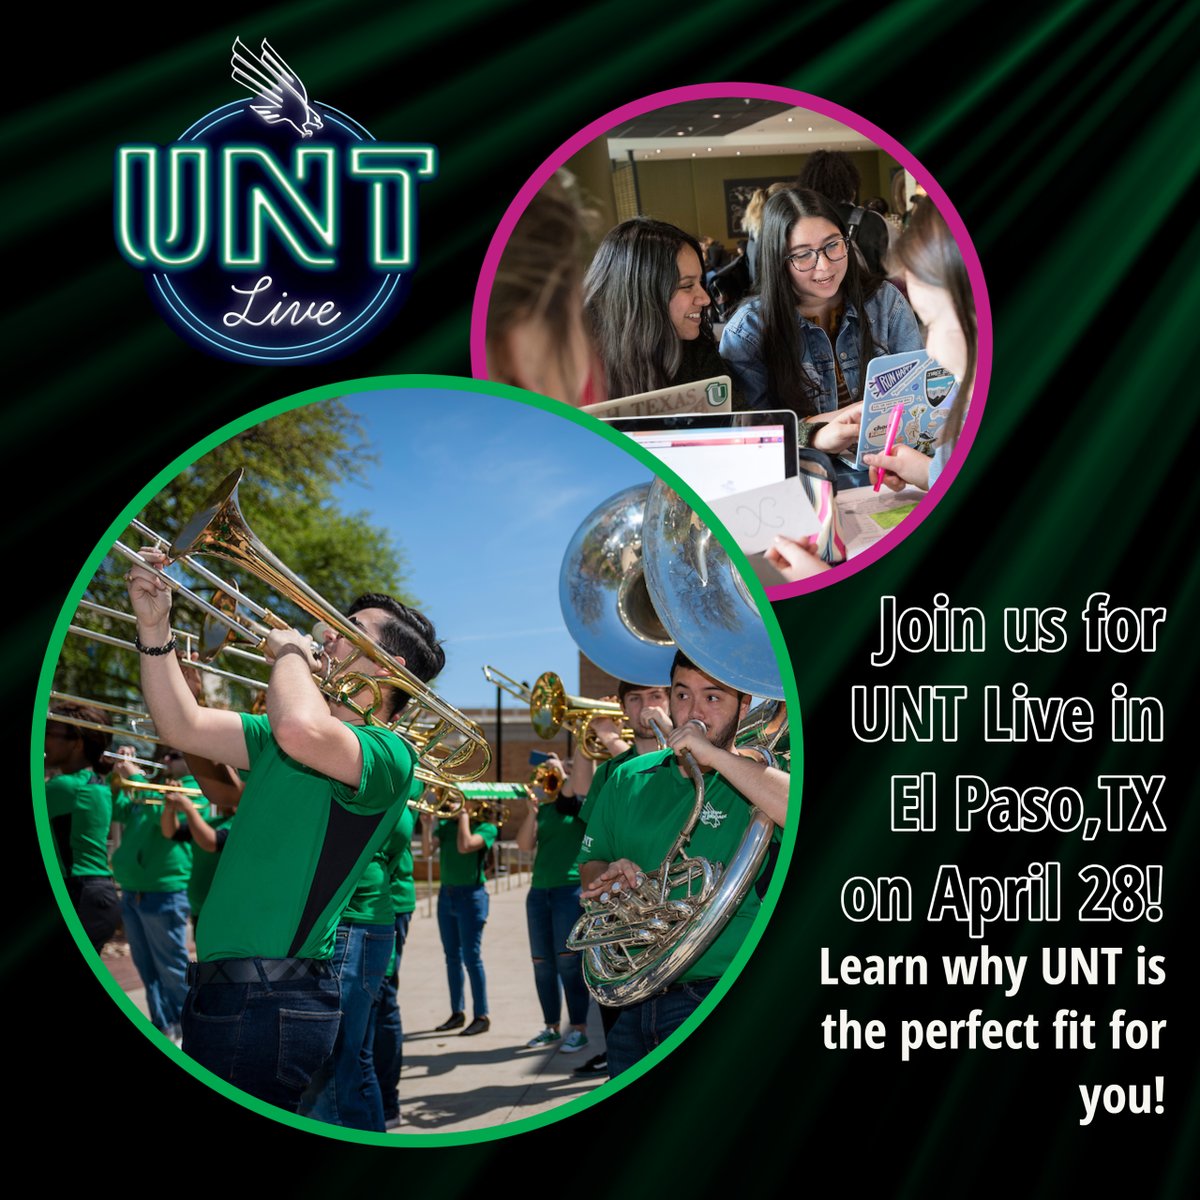 El Paso students - UNT Live is coming to your city on April 28th! Link in bio to learn more and register! #MeanGreen #UNT #FutureEagles